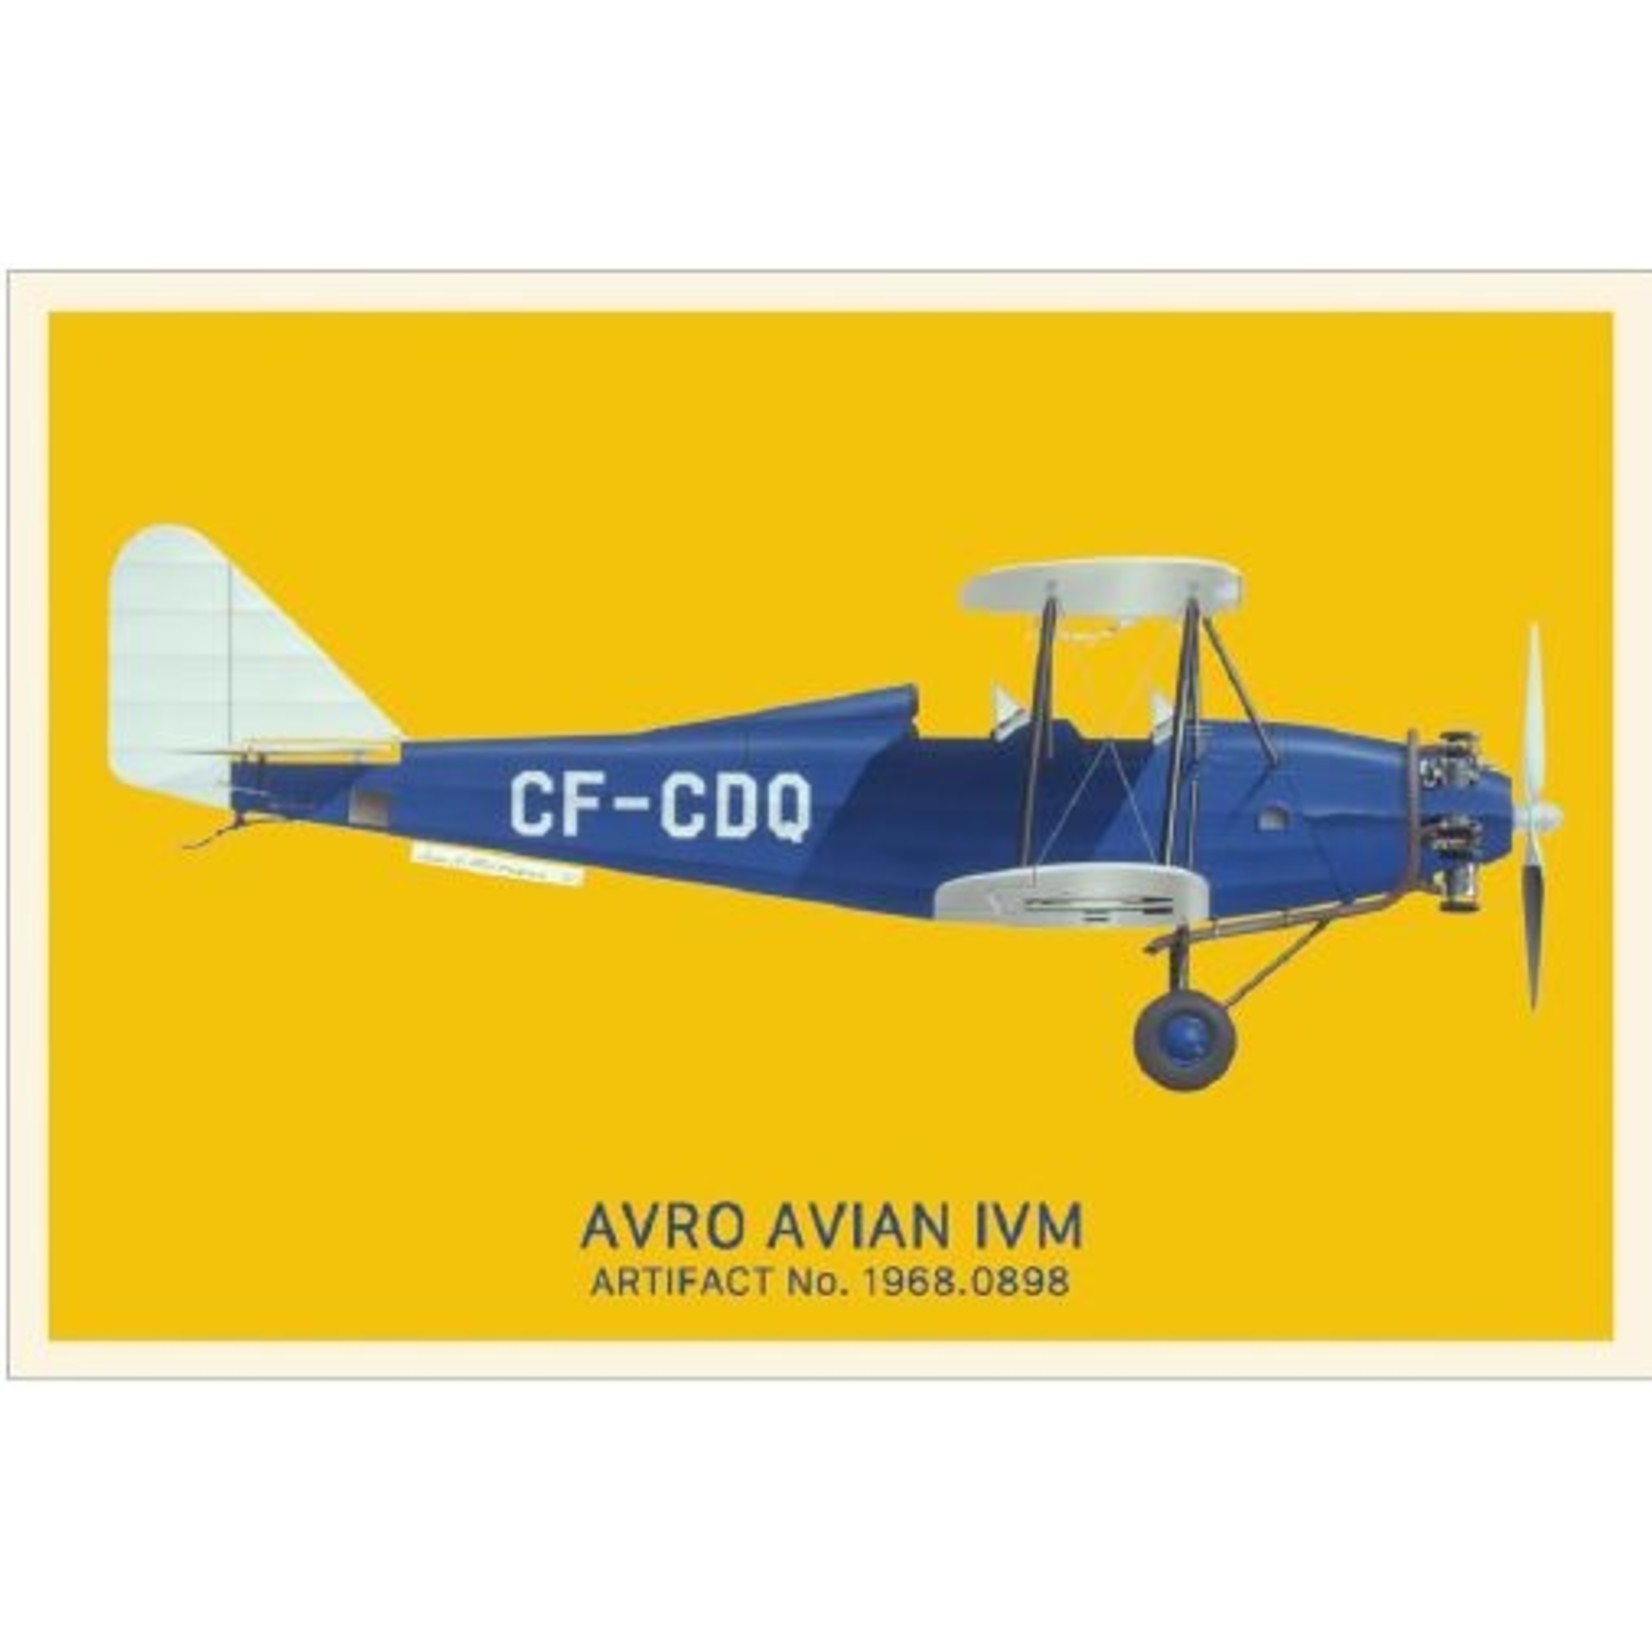 Aviation and Space Postcard Avro Avian